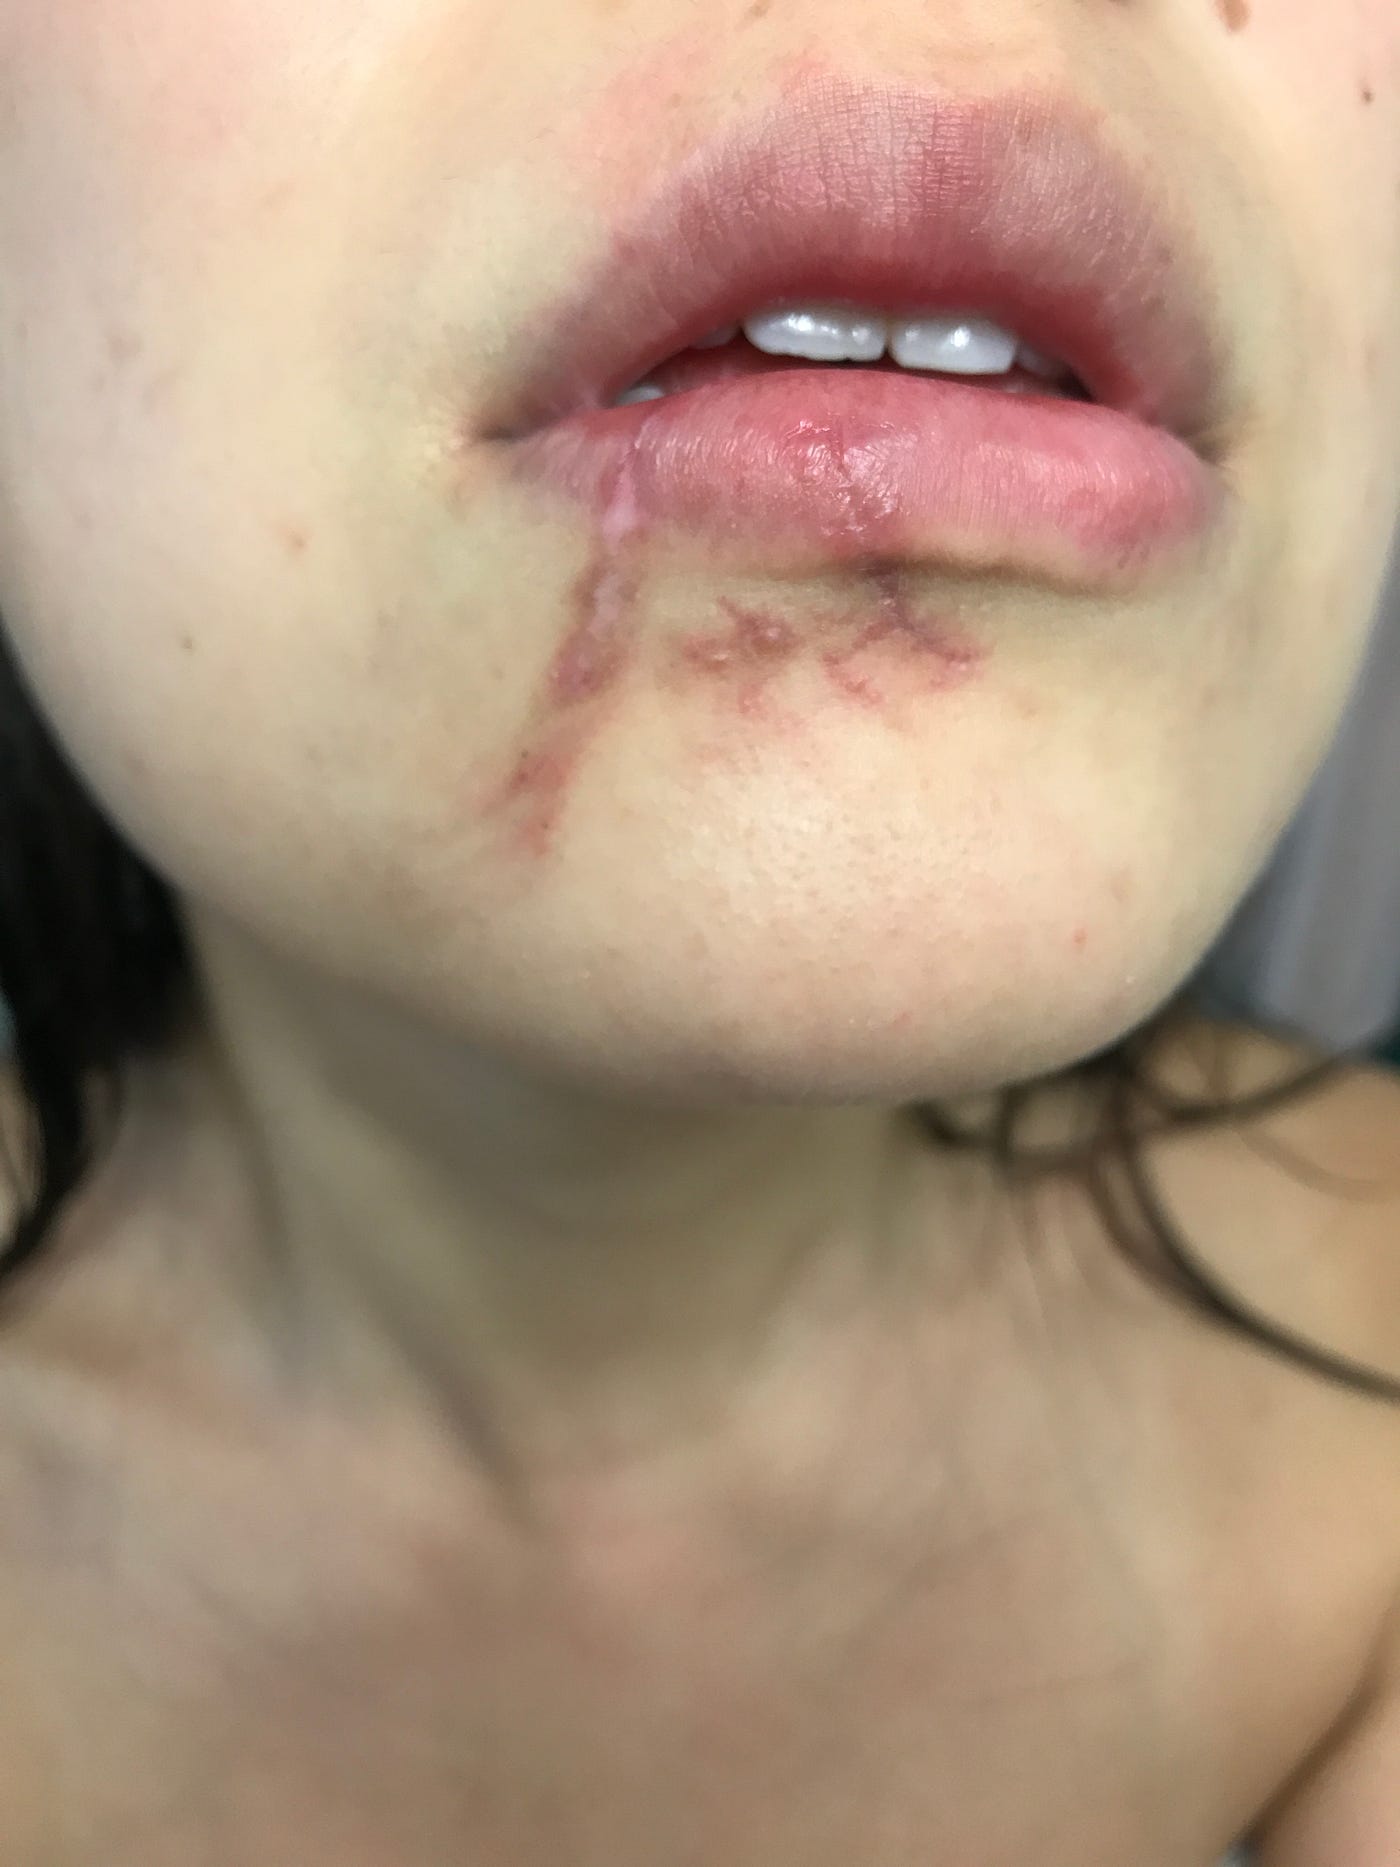 why does my dog bite my face